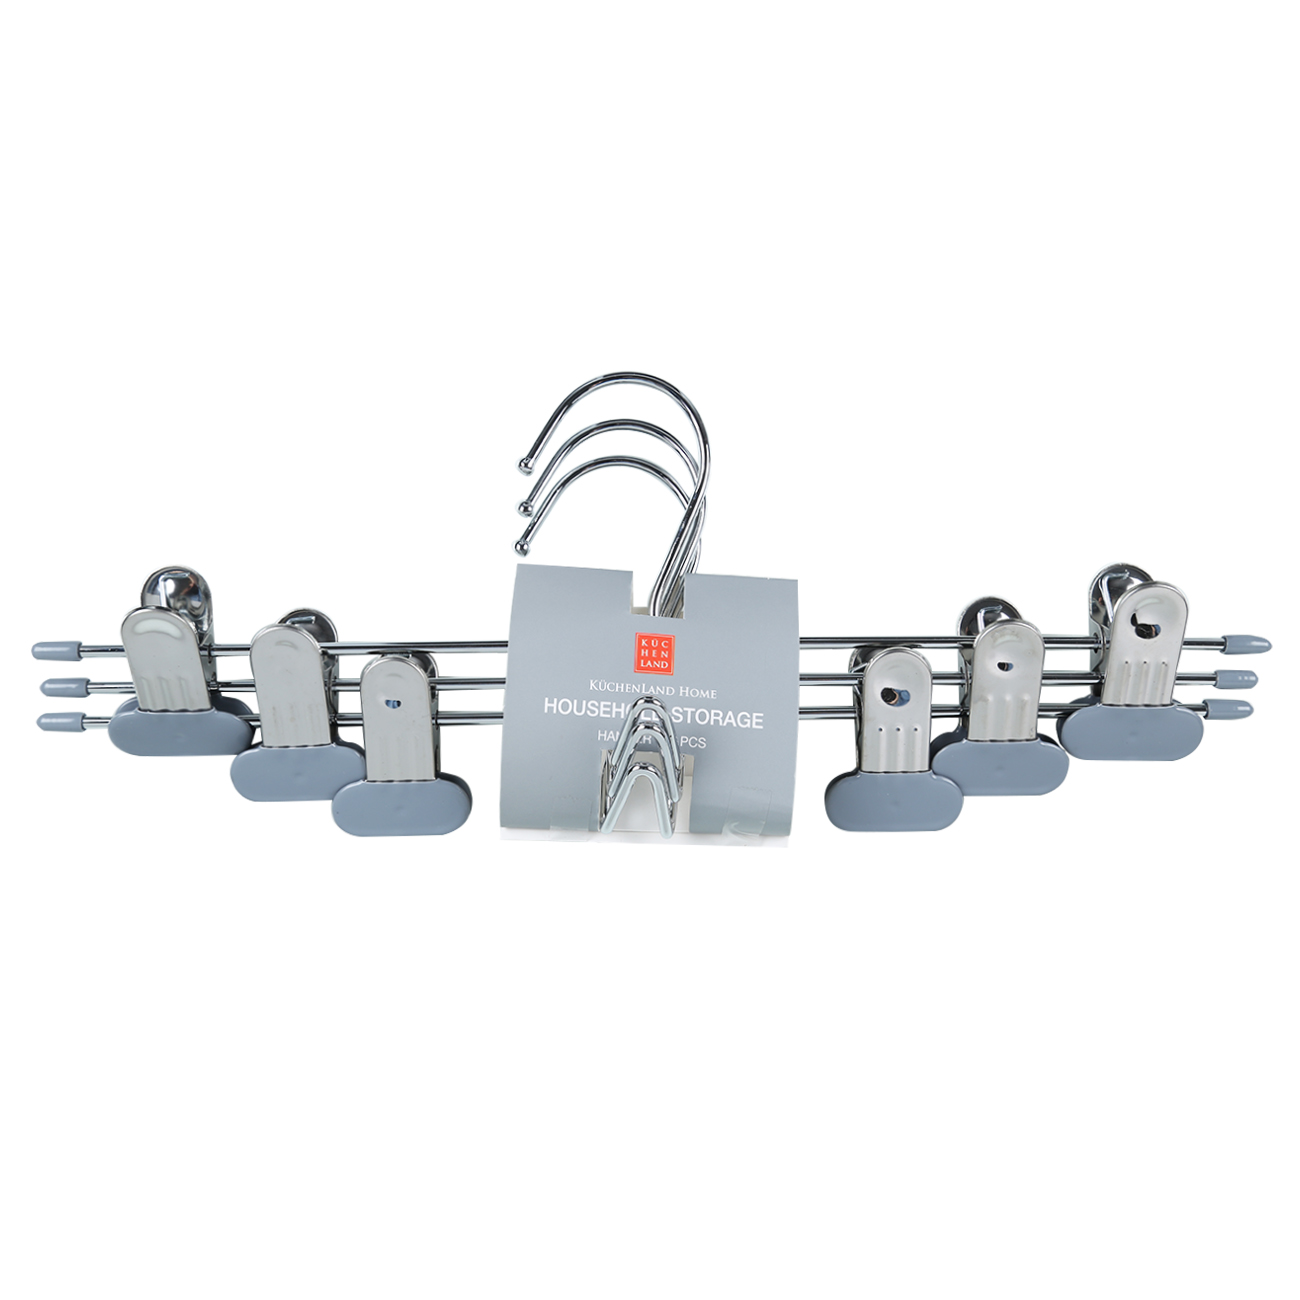 Pant/skirt hanger, 33 cm, 3 pcs, with clips, Coated metal, Grey, Colorful house изображение № 2